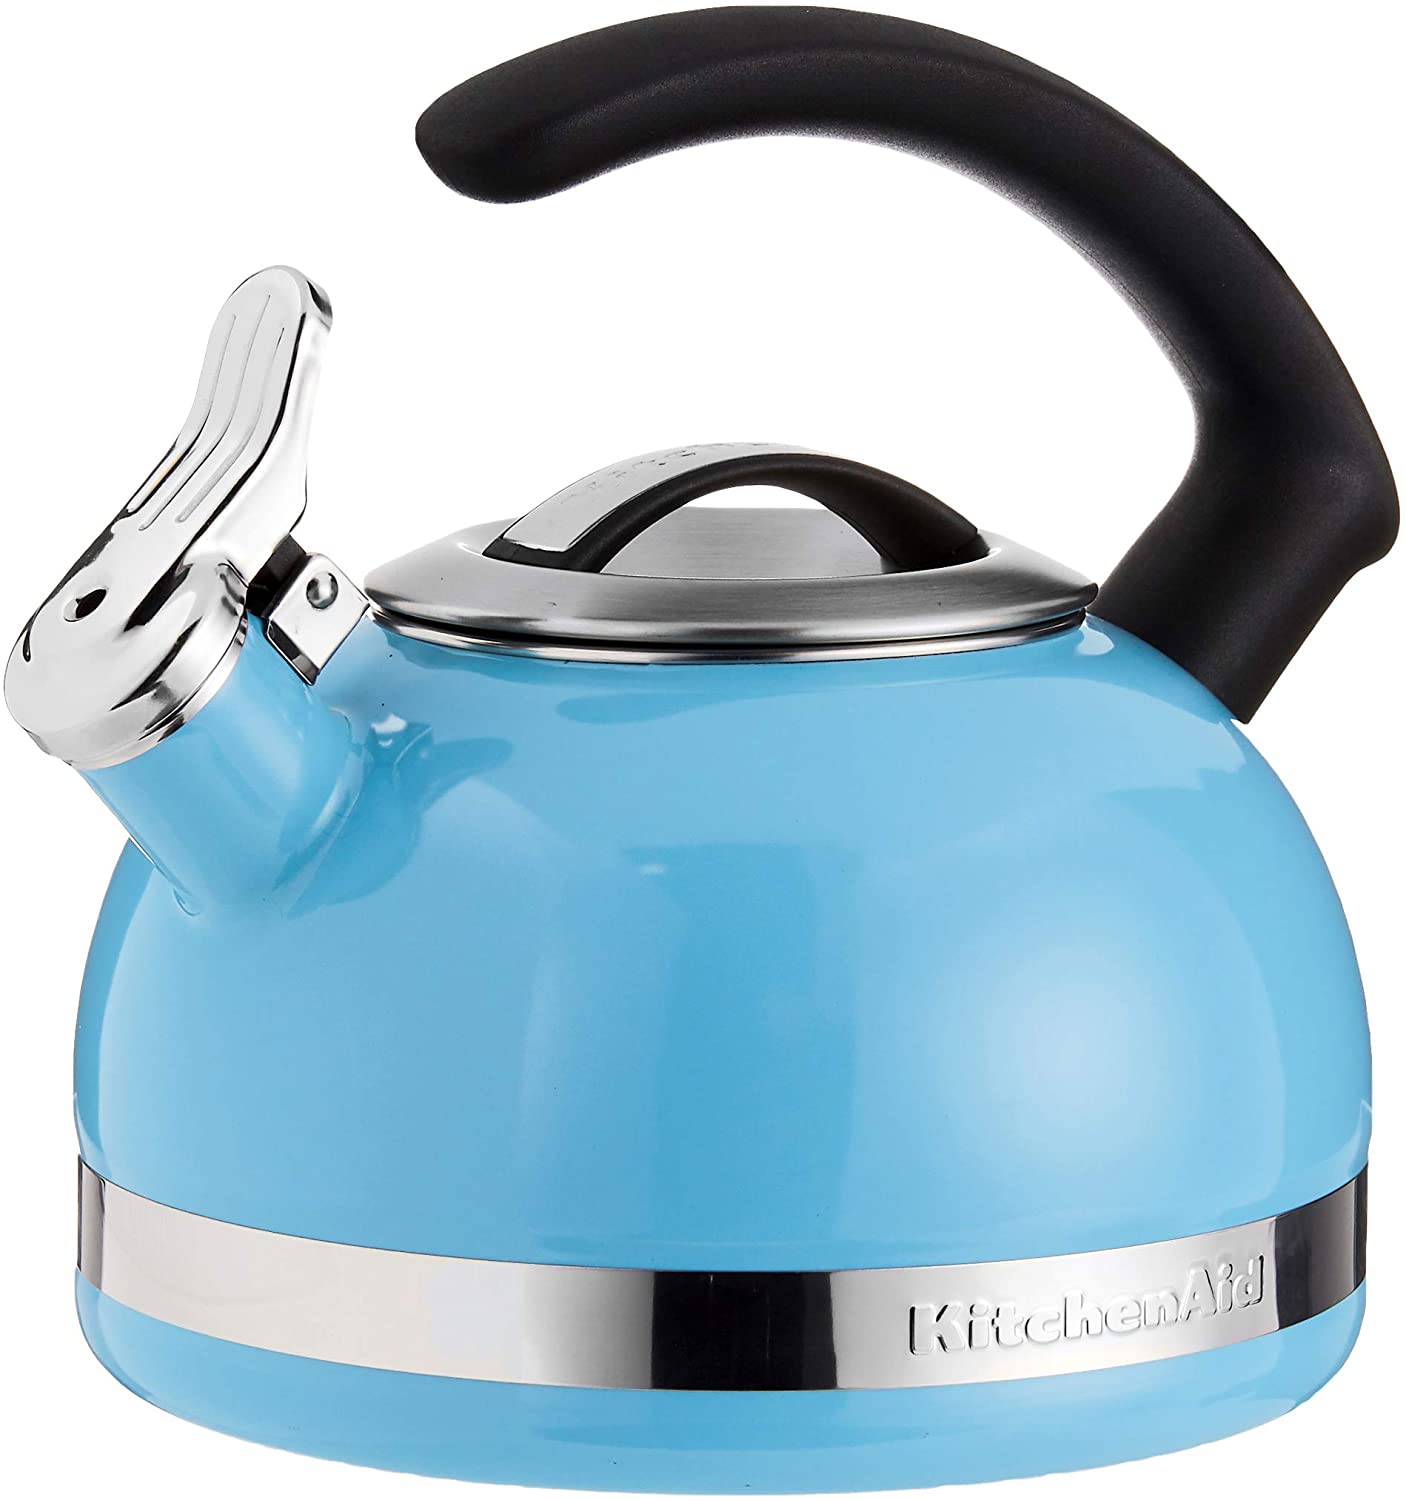 https://www.mymotorhomelife.com/wp-content/uploads/2021/02/KitchenAid-2.0-Quart-Kettle-with-C-Handle-and-Trim-Band-Cameo-Blue.jpg